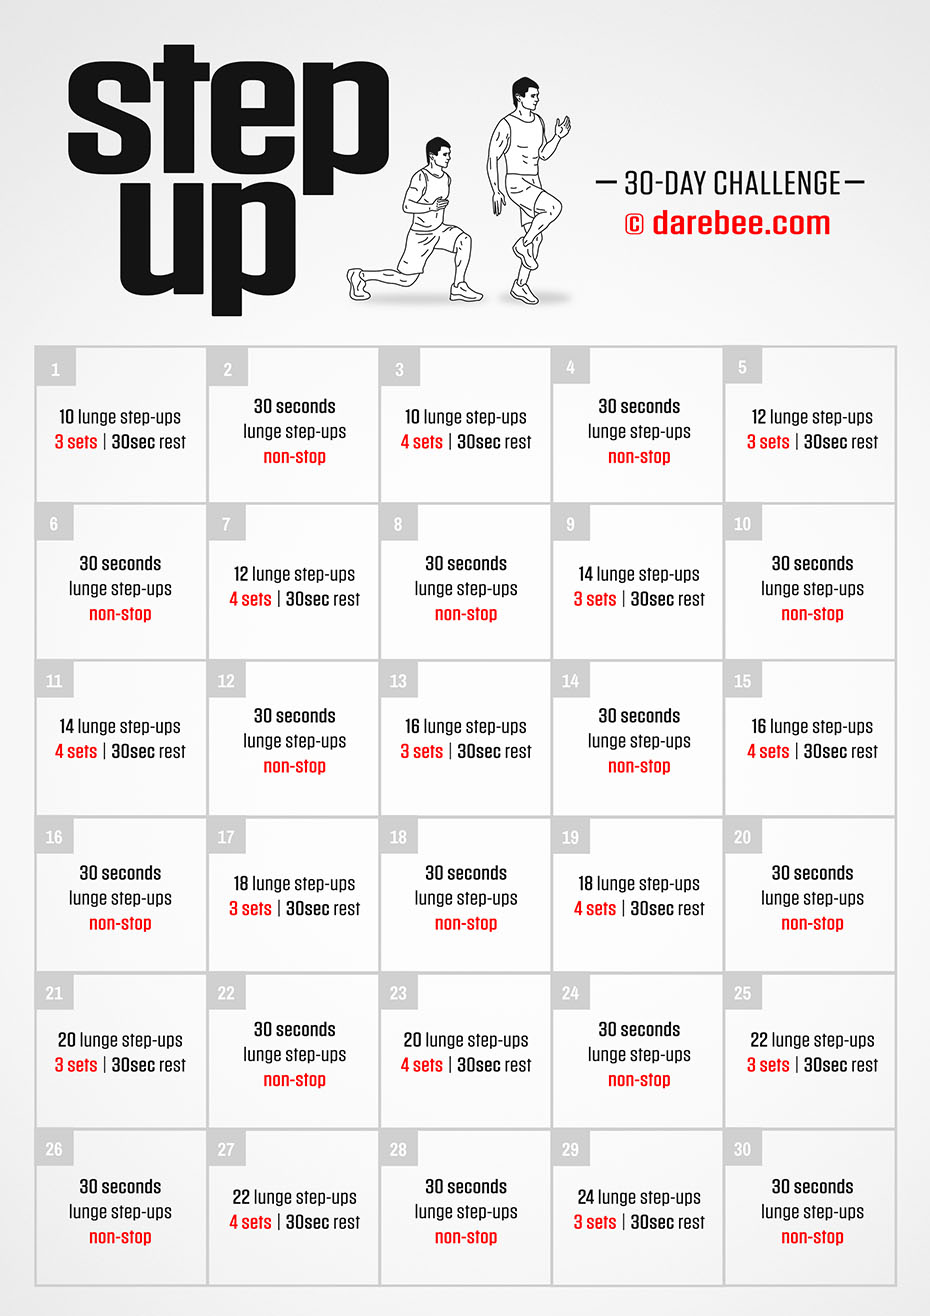 Step-Up is a Darebee home-fitness challenge that increases your lower body strength and coordination. 